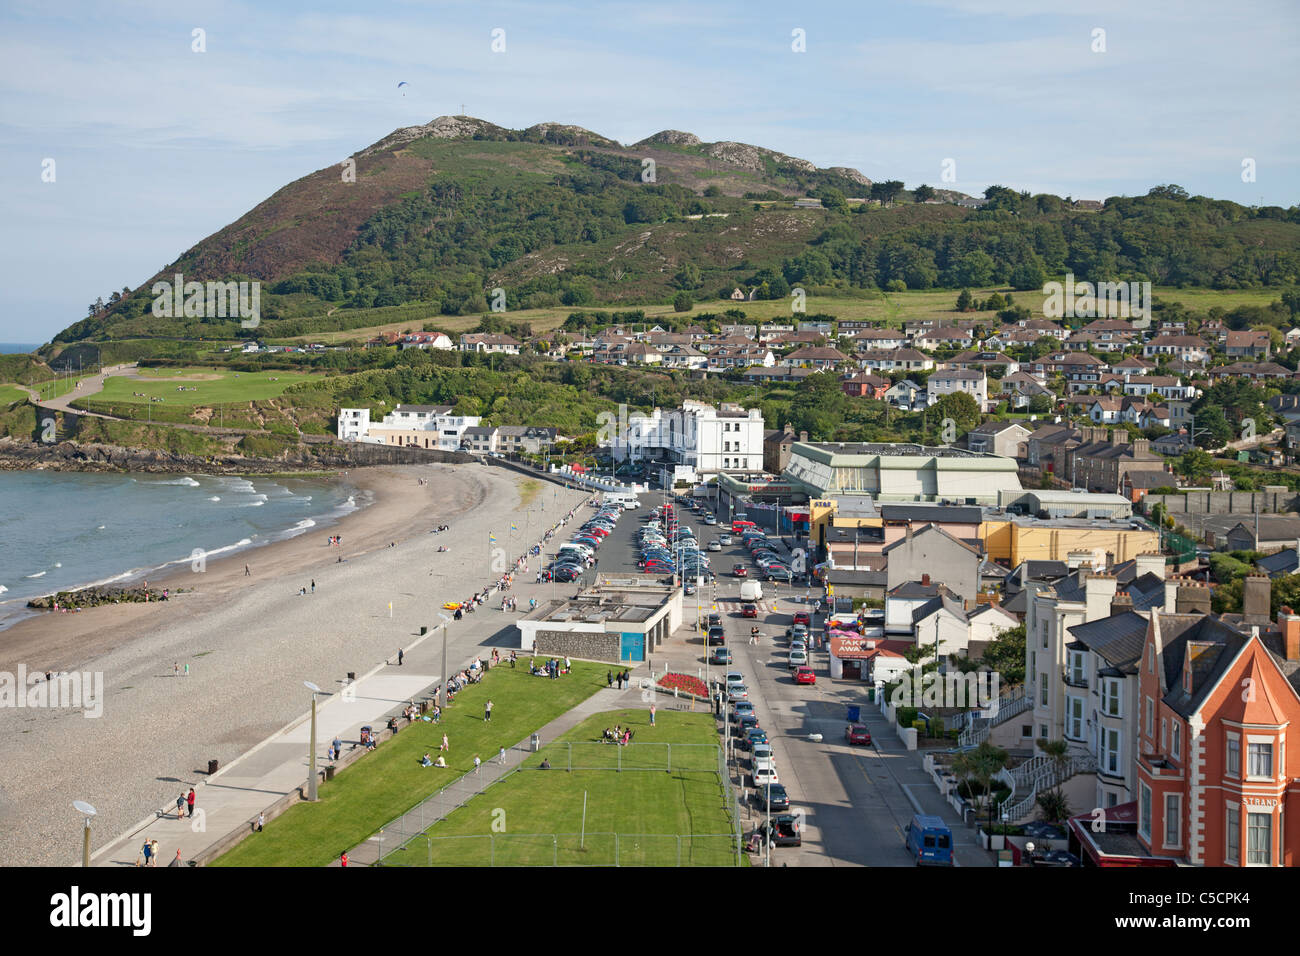 Elevated view of the south of the seaside town of Bray, Co Wicklow, looking towards Bray Head Stock Photo